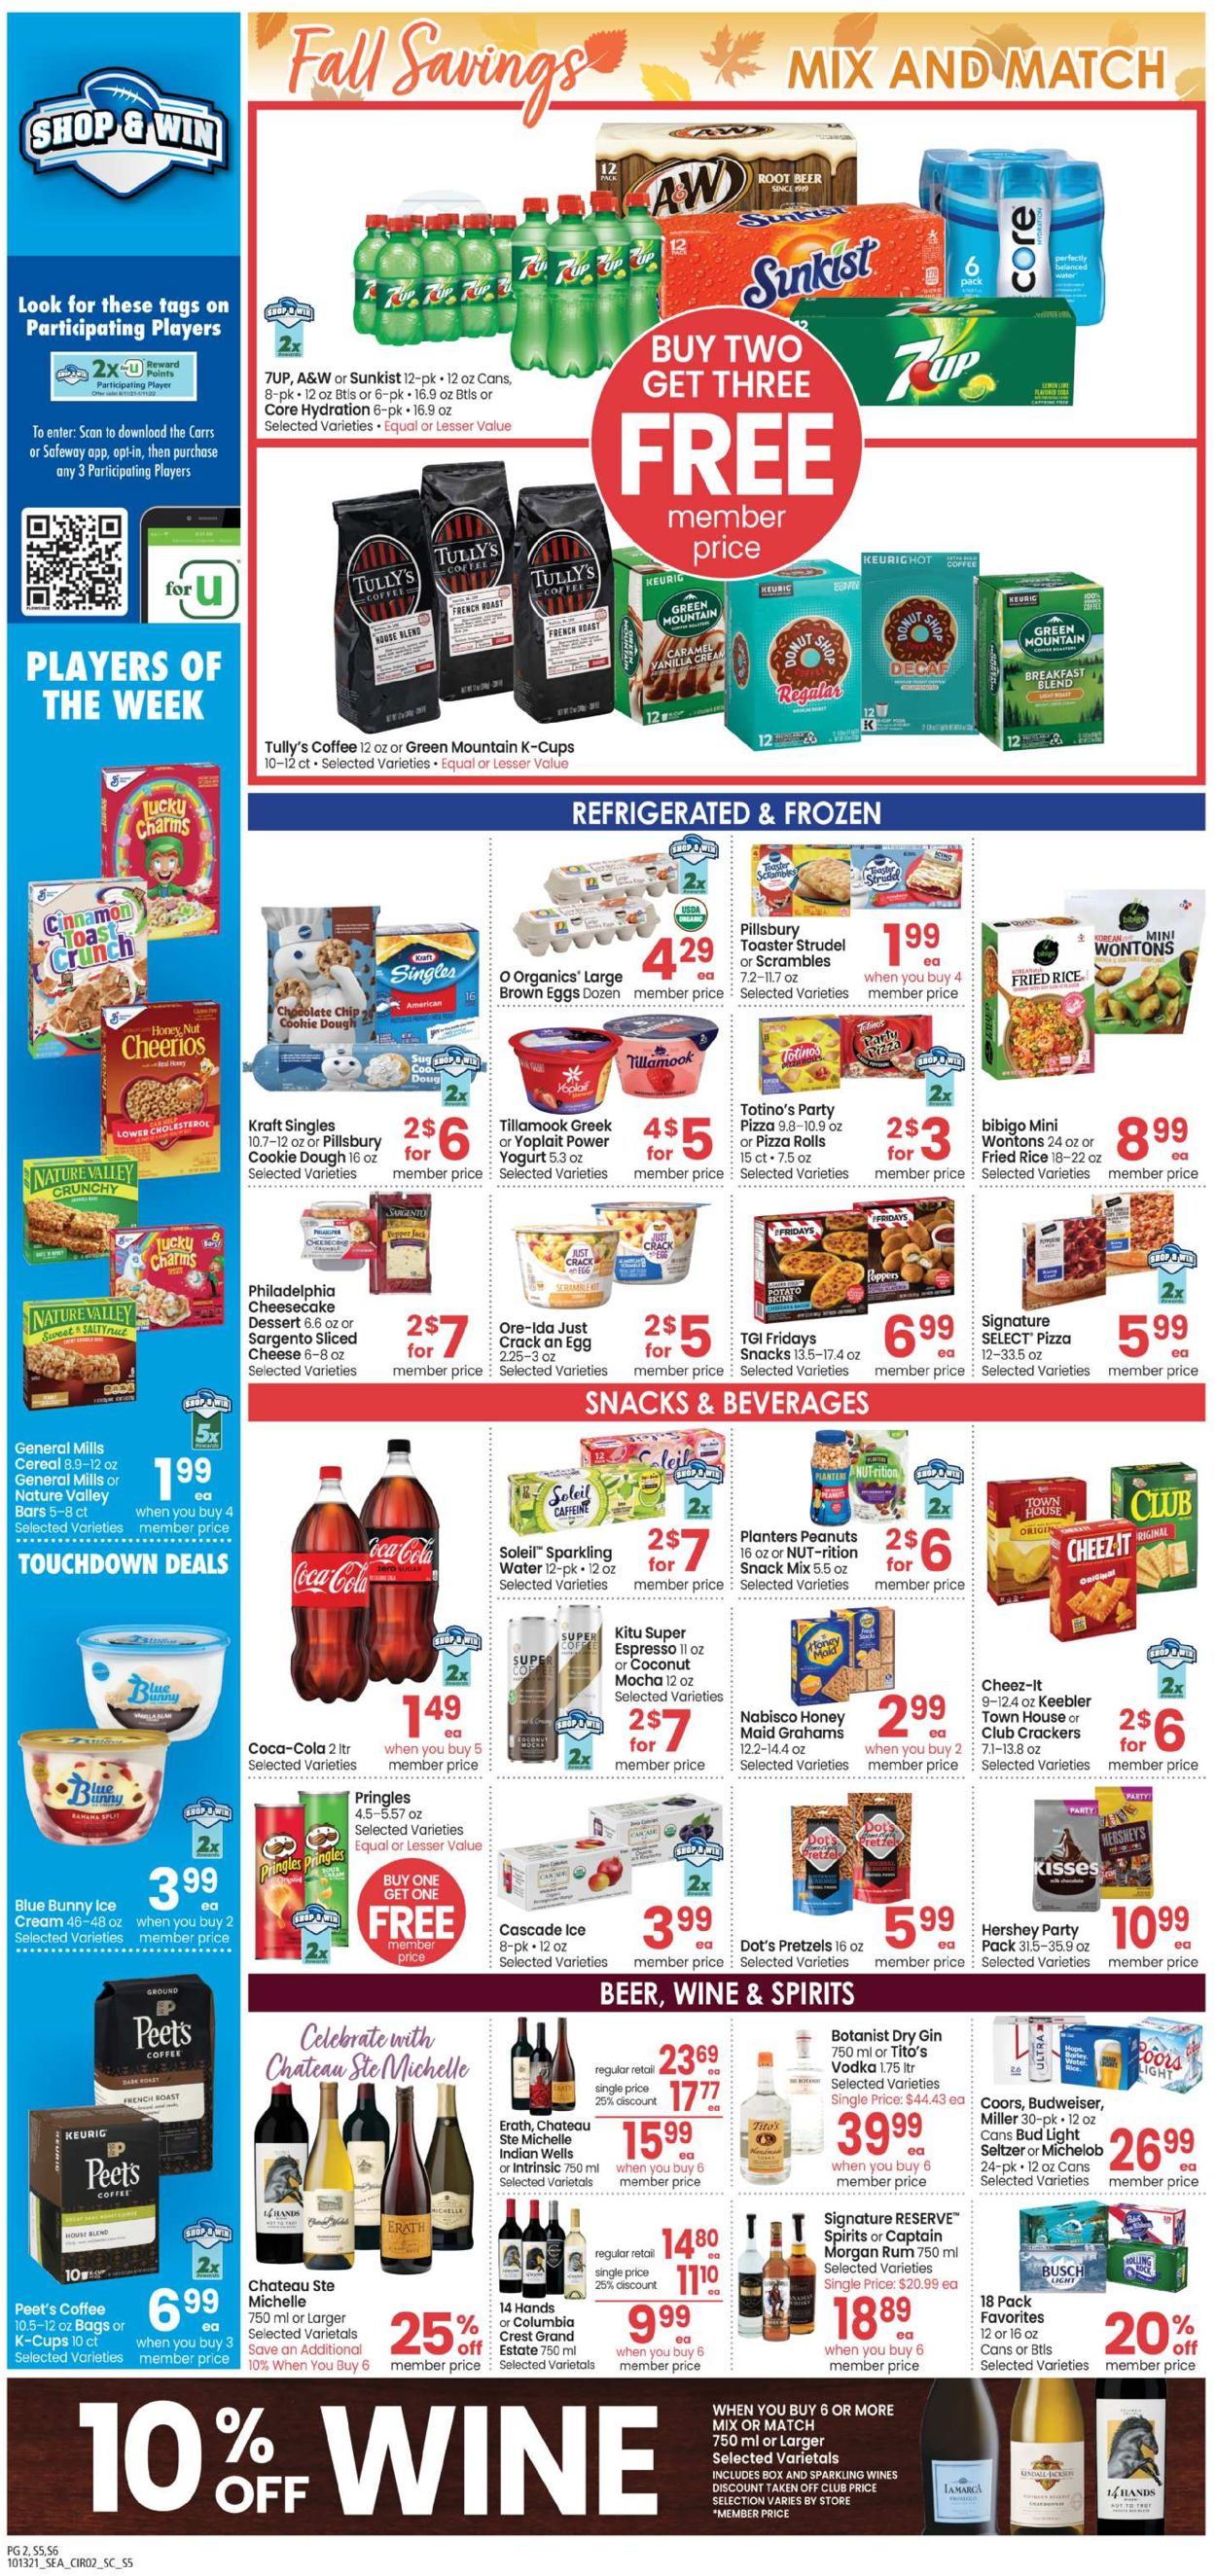 Carrs Ad from 10/13/2021